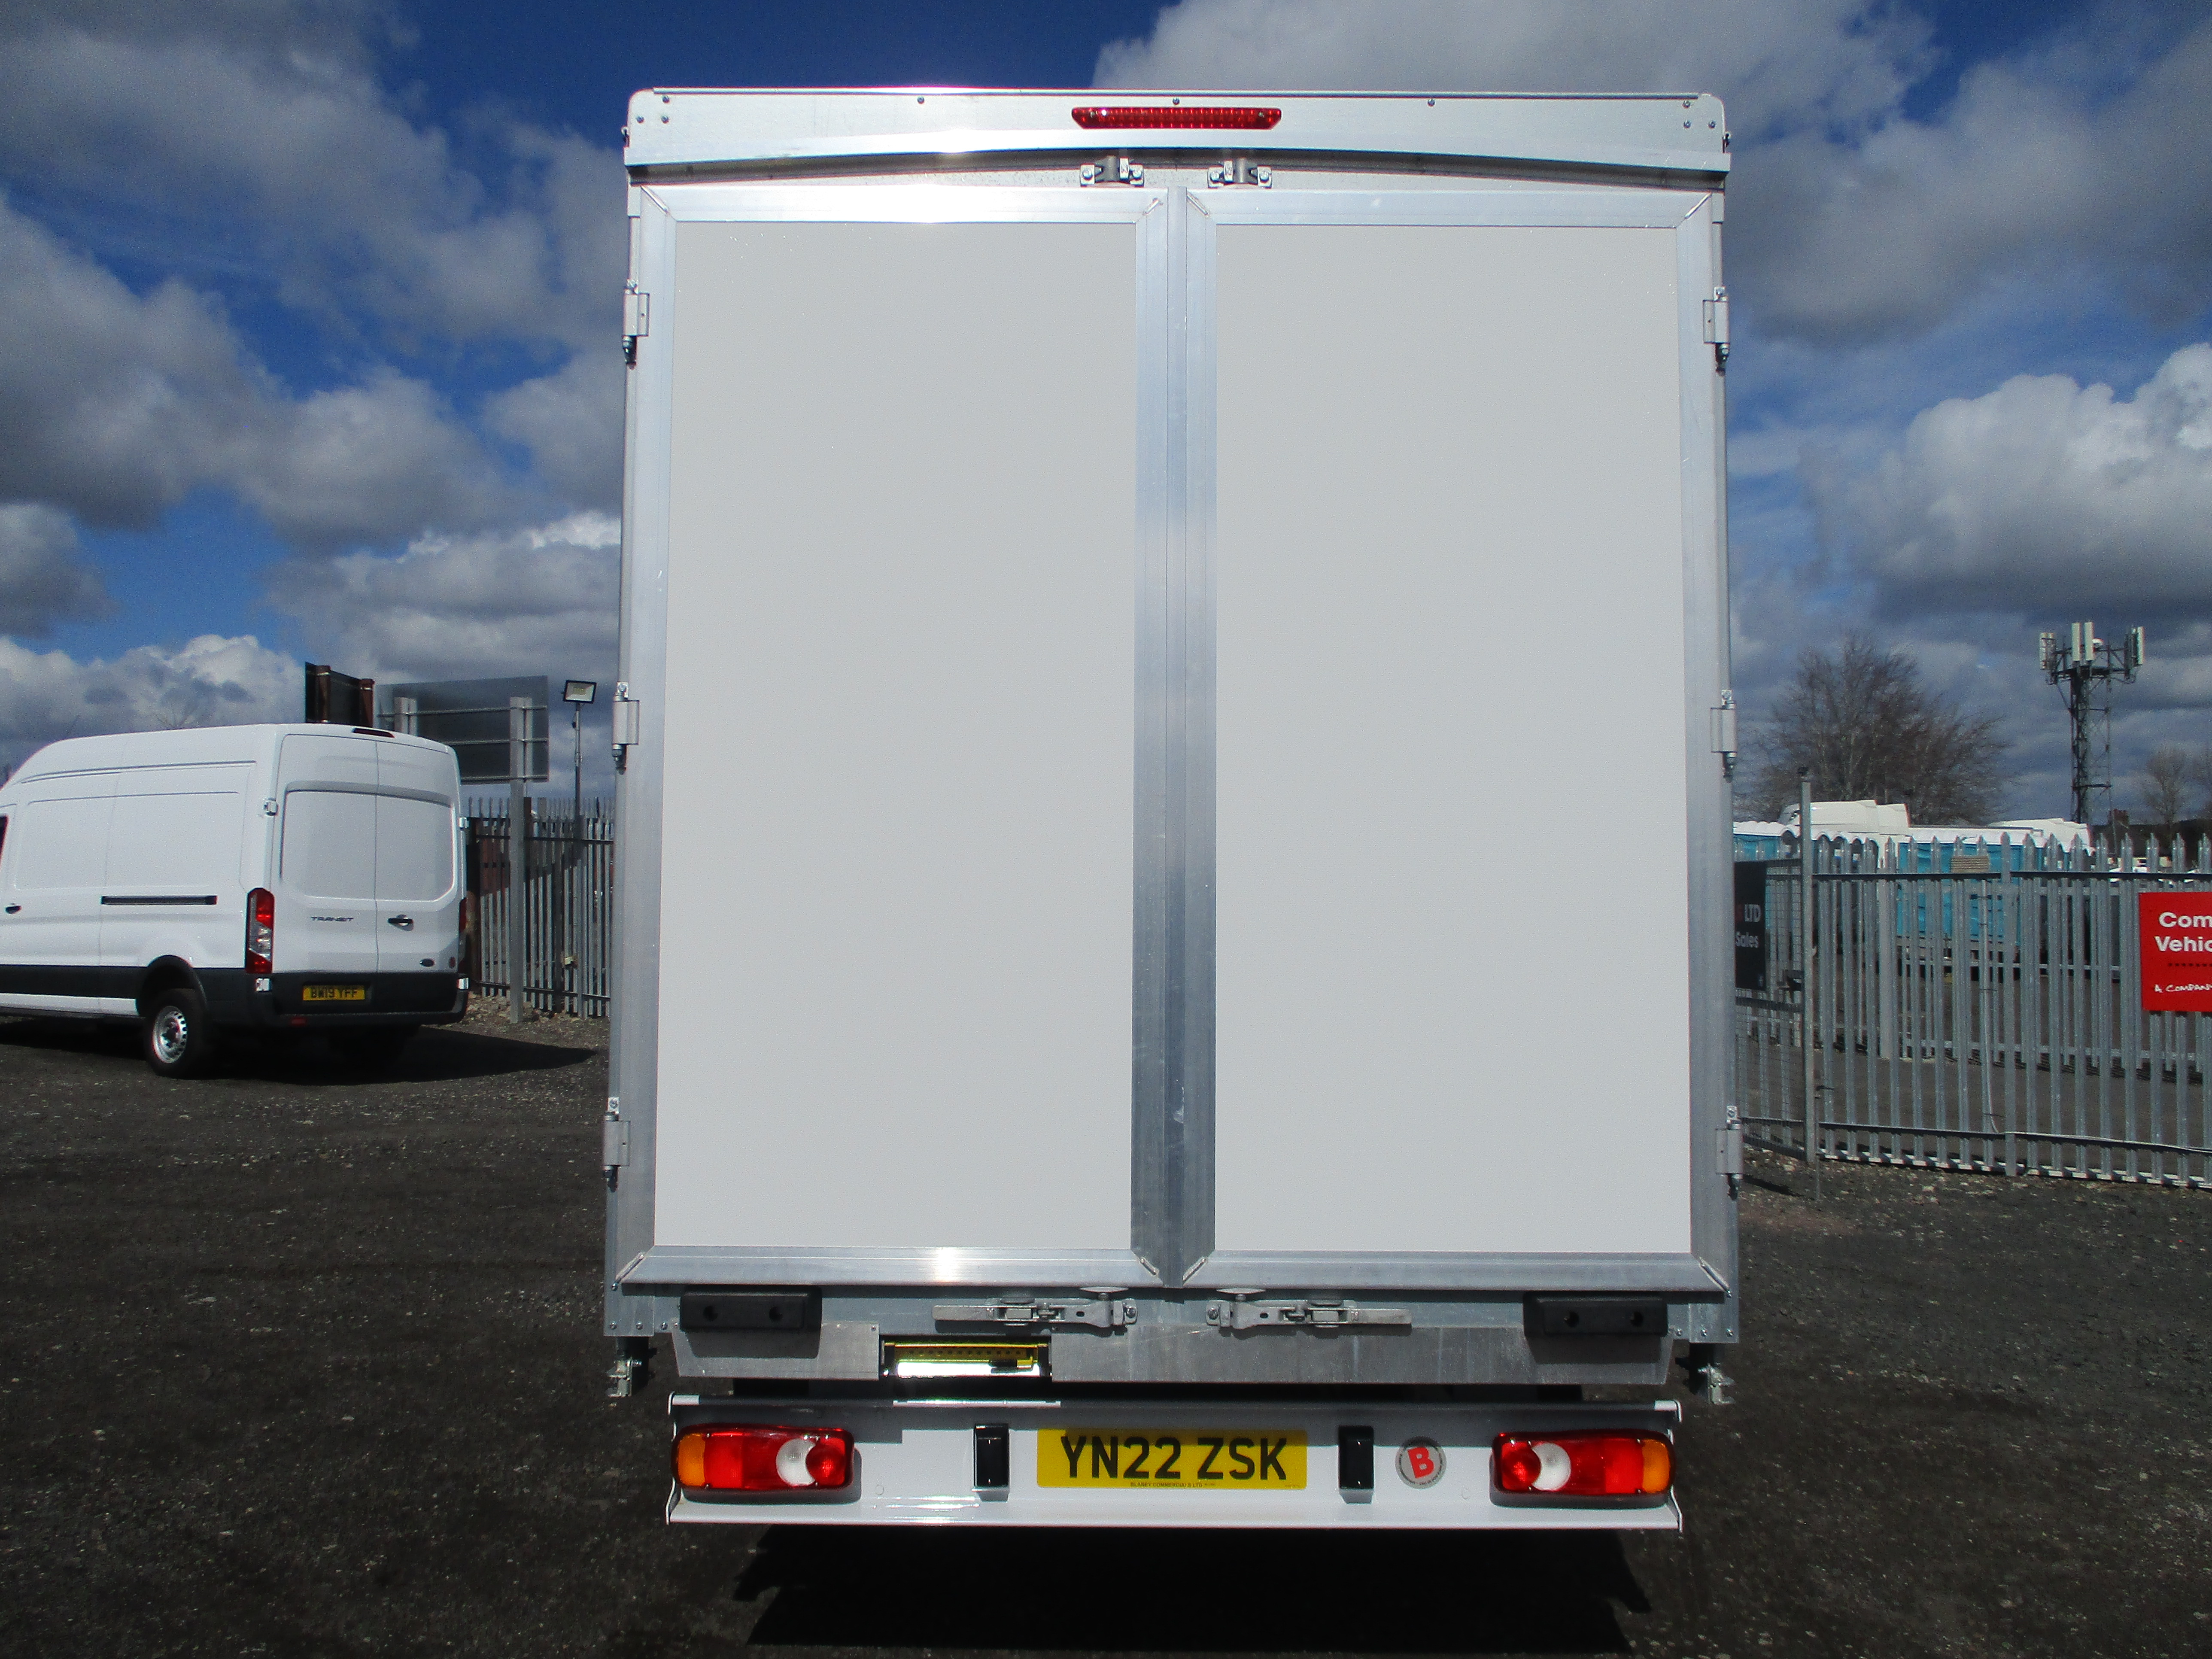 Fiat Ducato Curtainsider Series 8 with Barn Doors 2.3 Diesel 140PS, BIG SPEC including Air Con ( £1,000 OFF RRP )